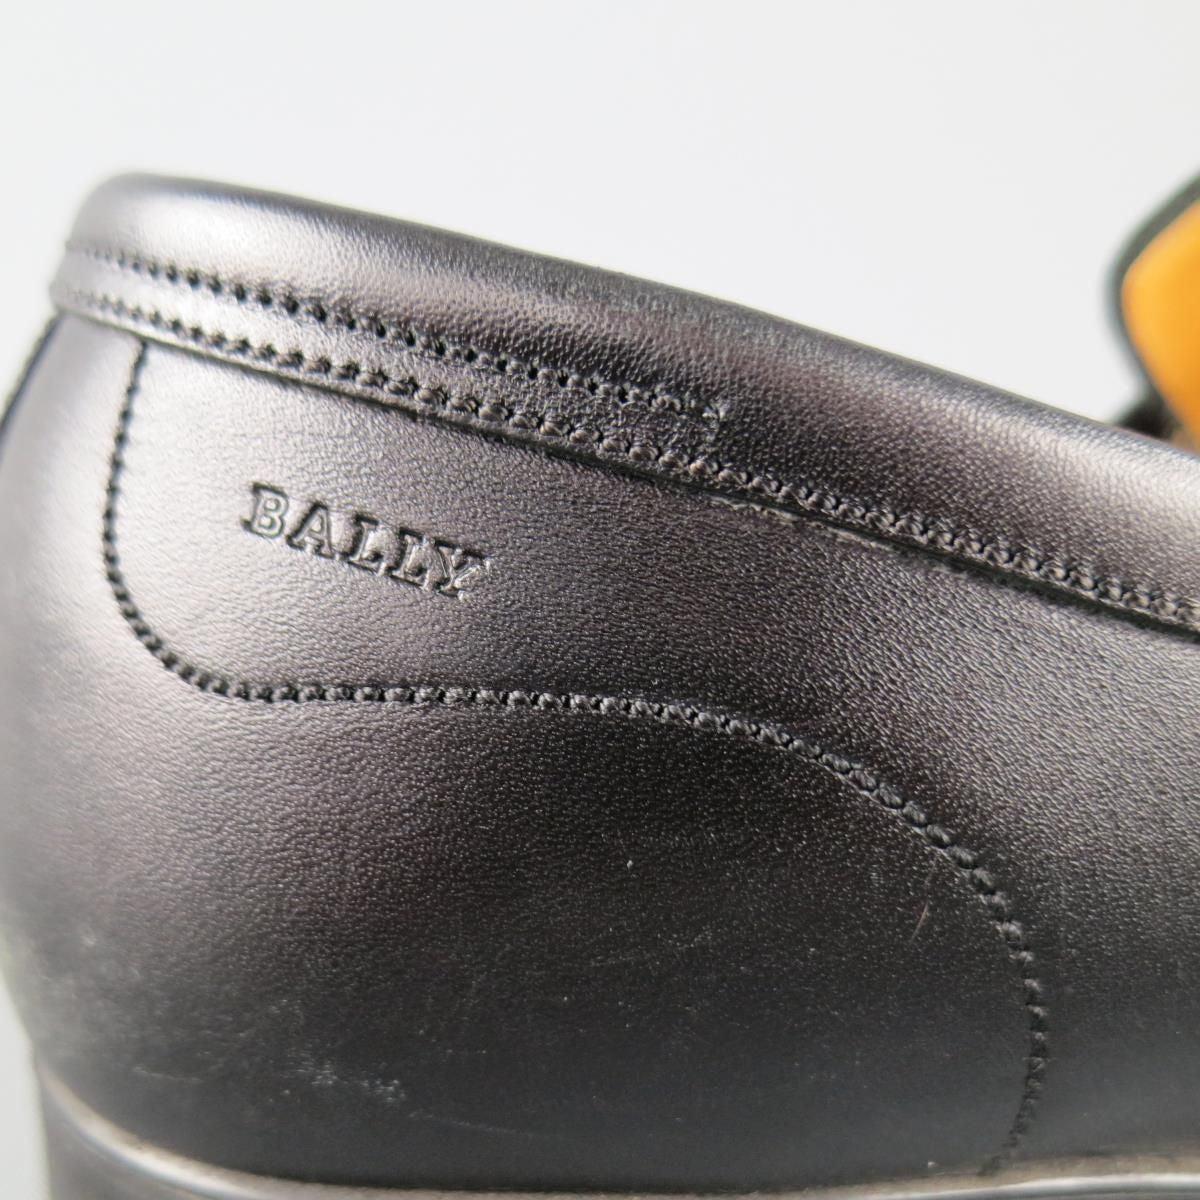 BALLY Size 7.5 Black Leather Penny Loafers For Sale 2